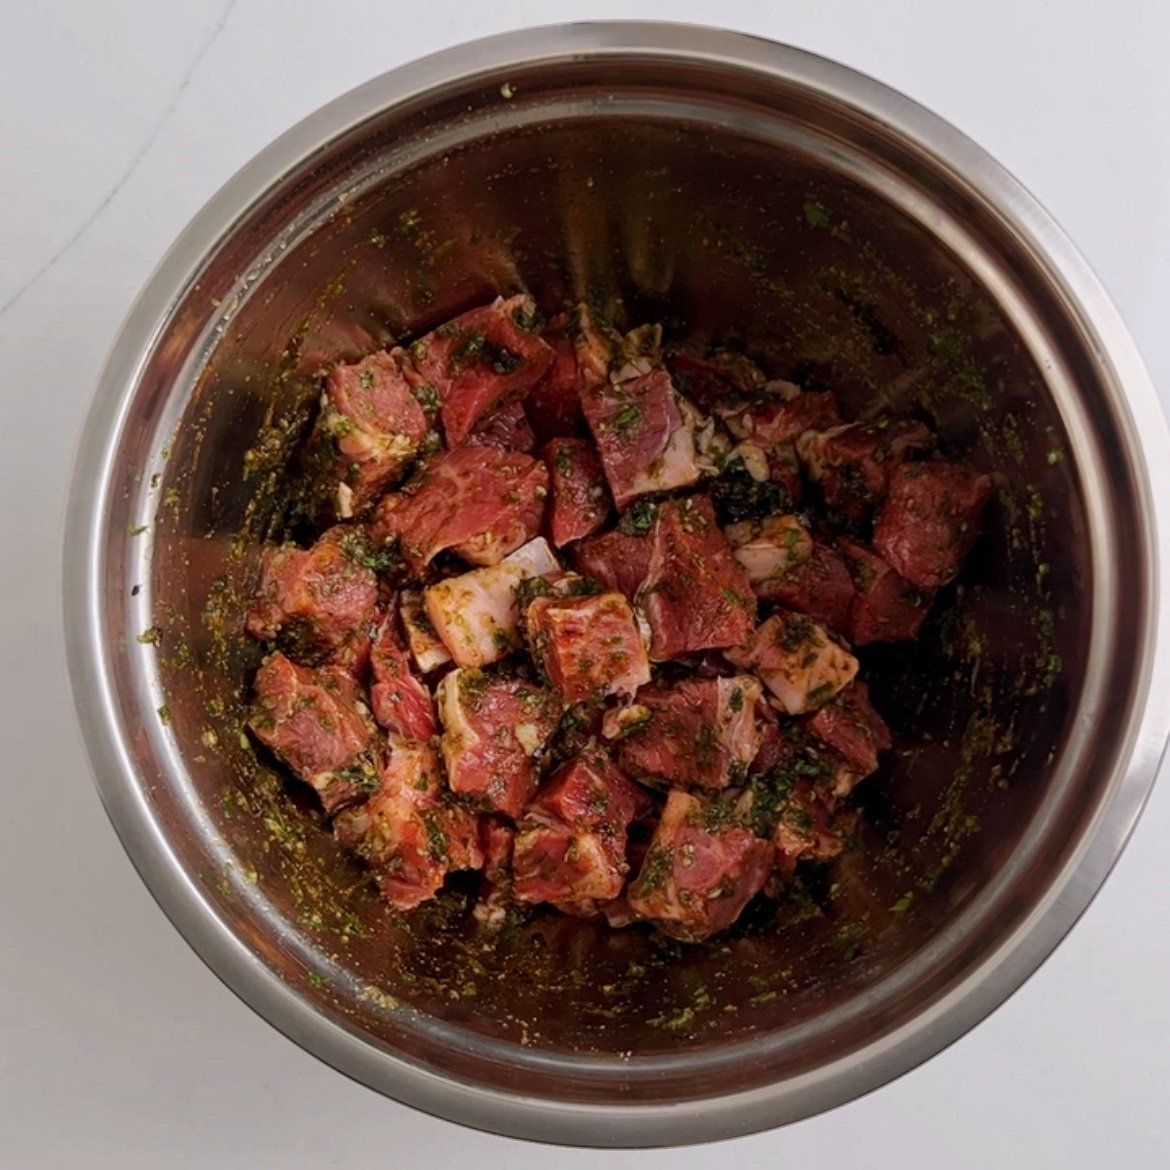 Cubed beef marinating in a large stainless steel bowl